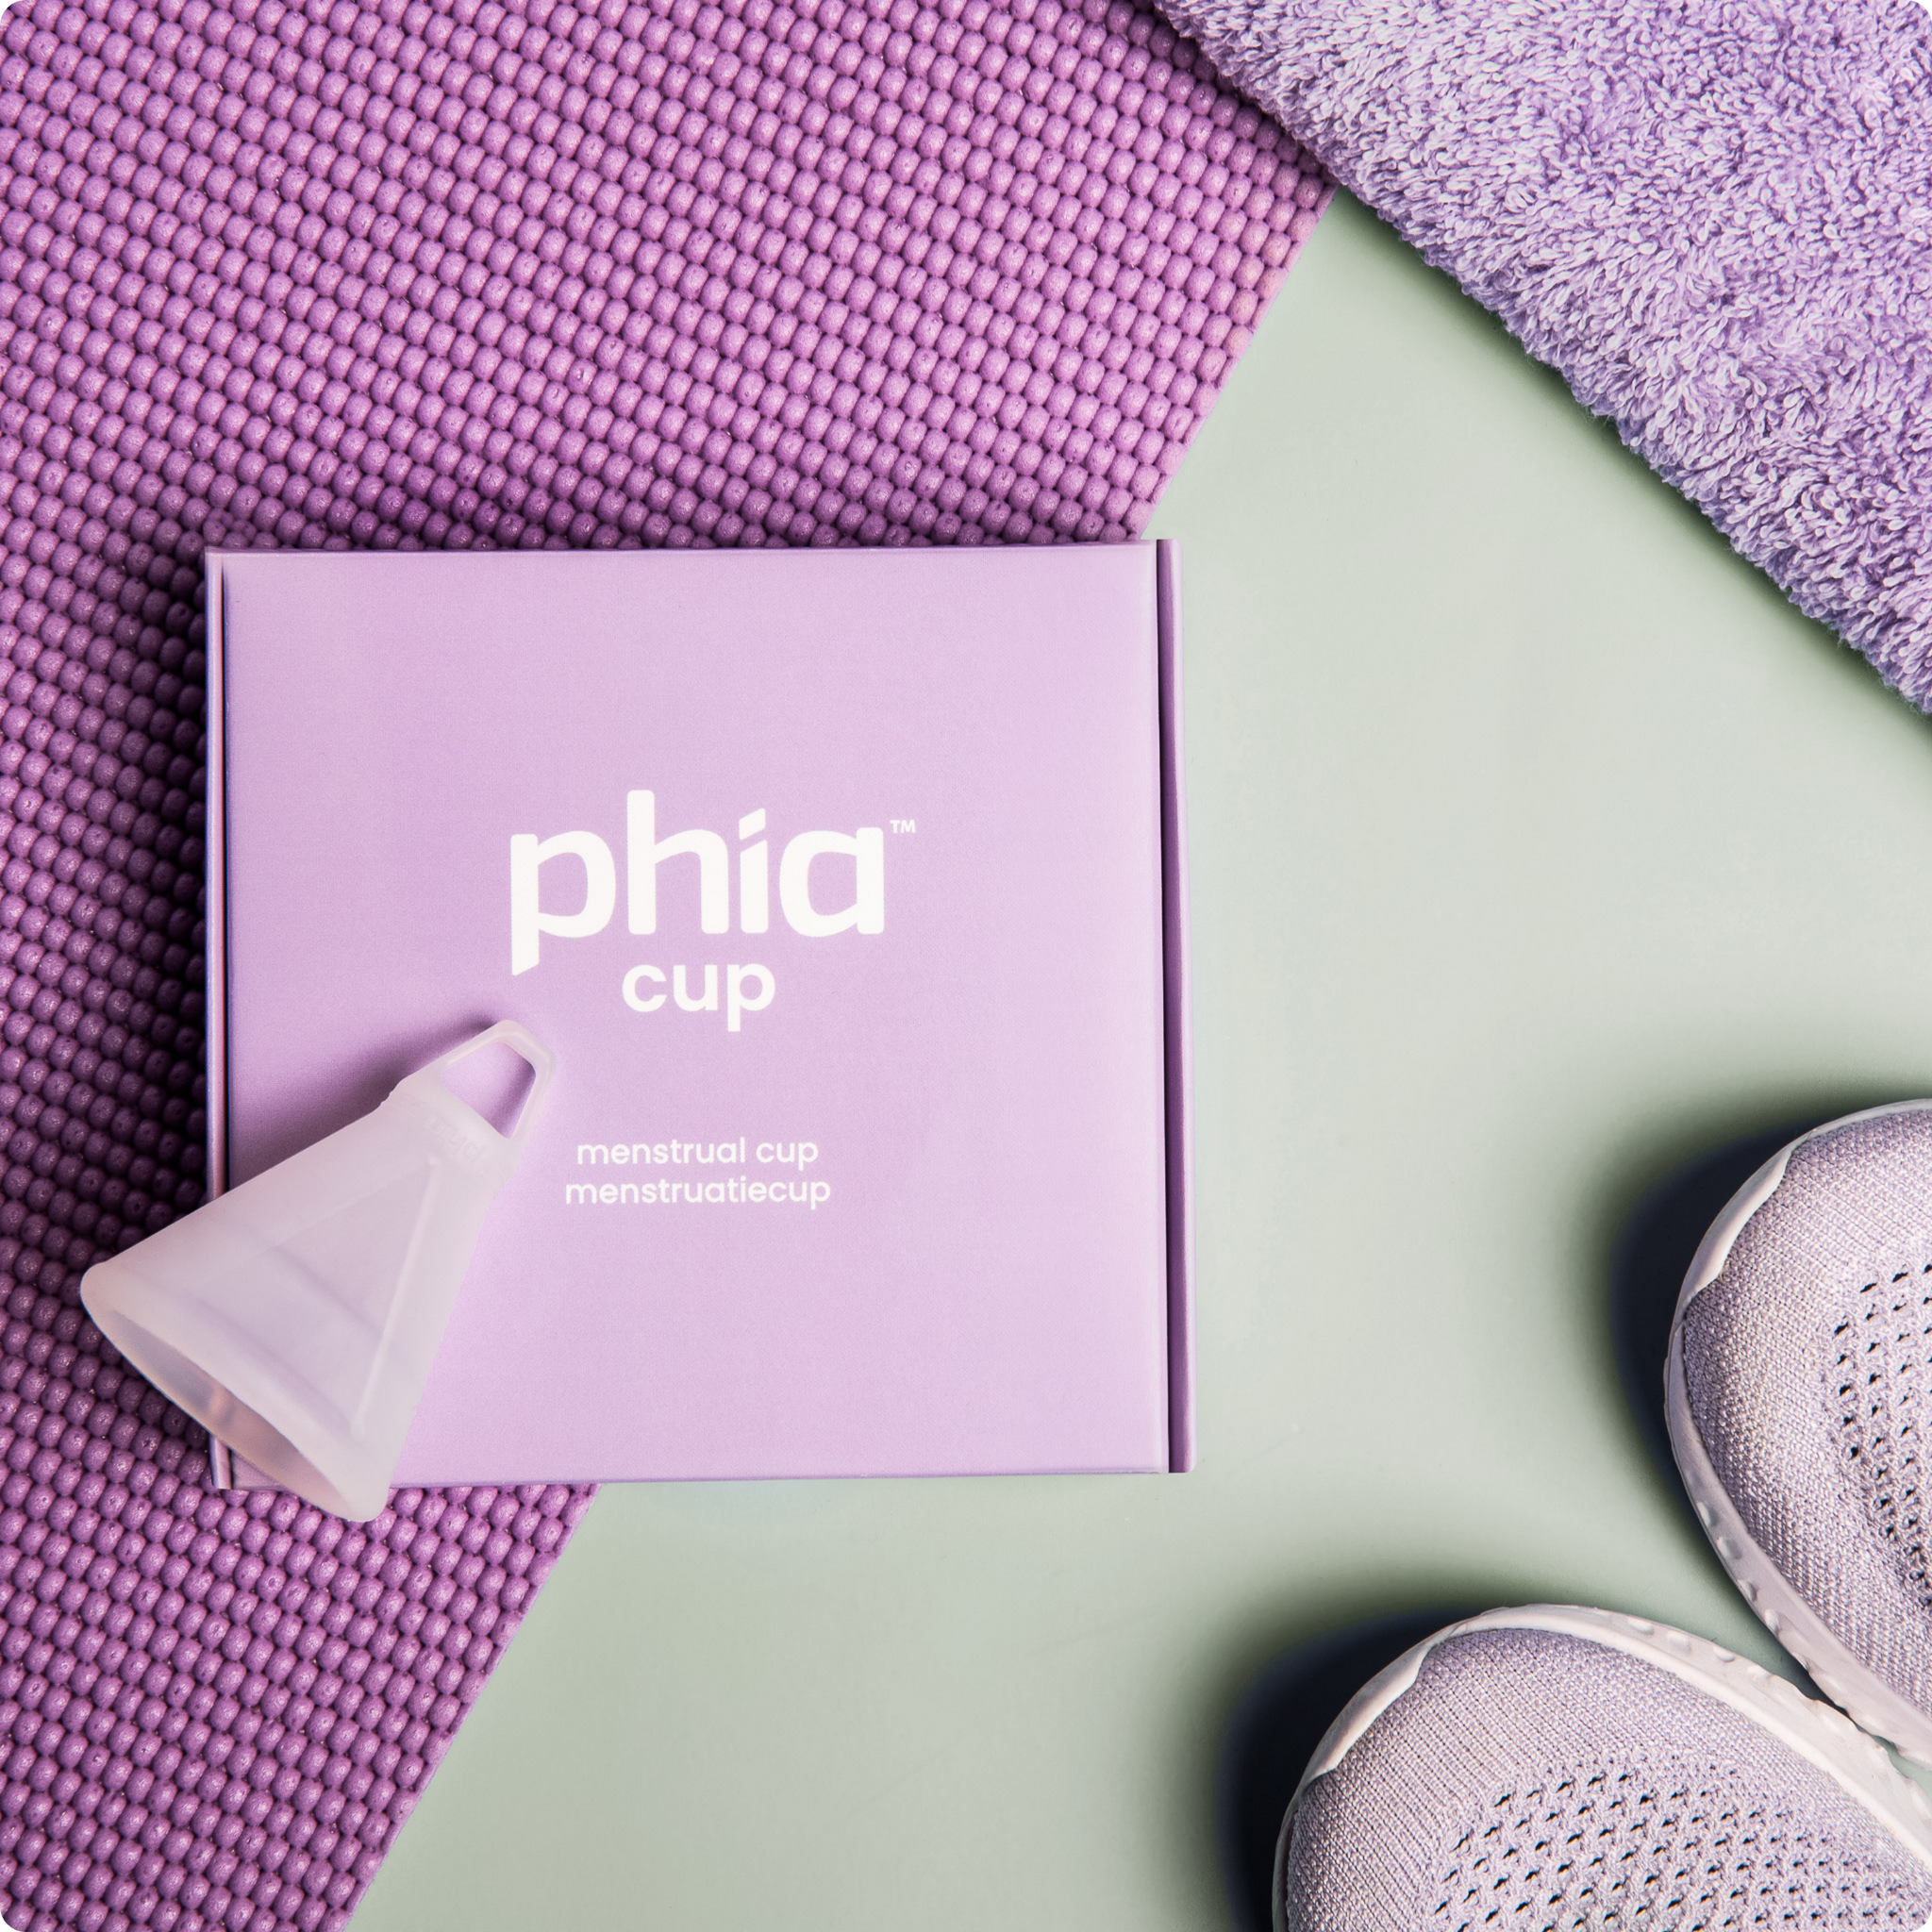 Phia Menstrual Cup while exercising with a yoga mat and running shoes. 